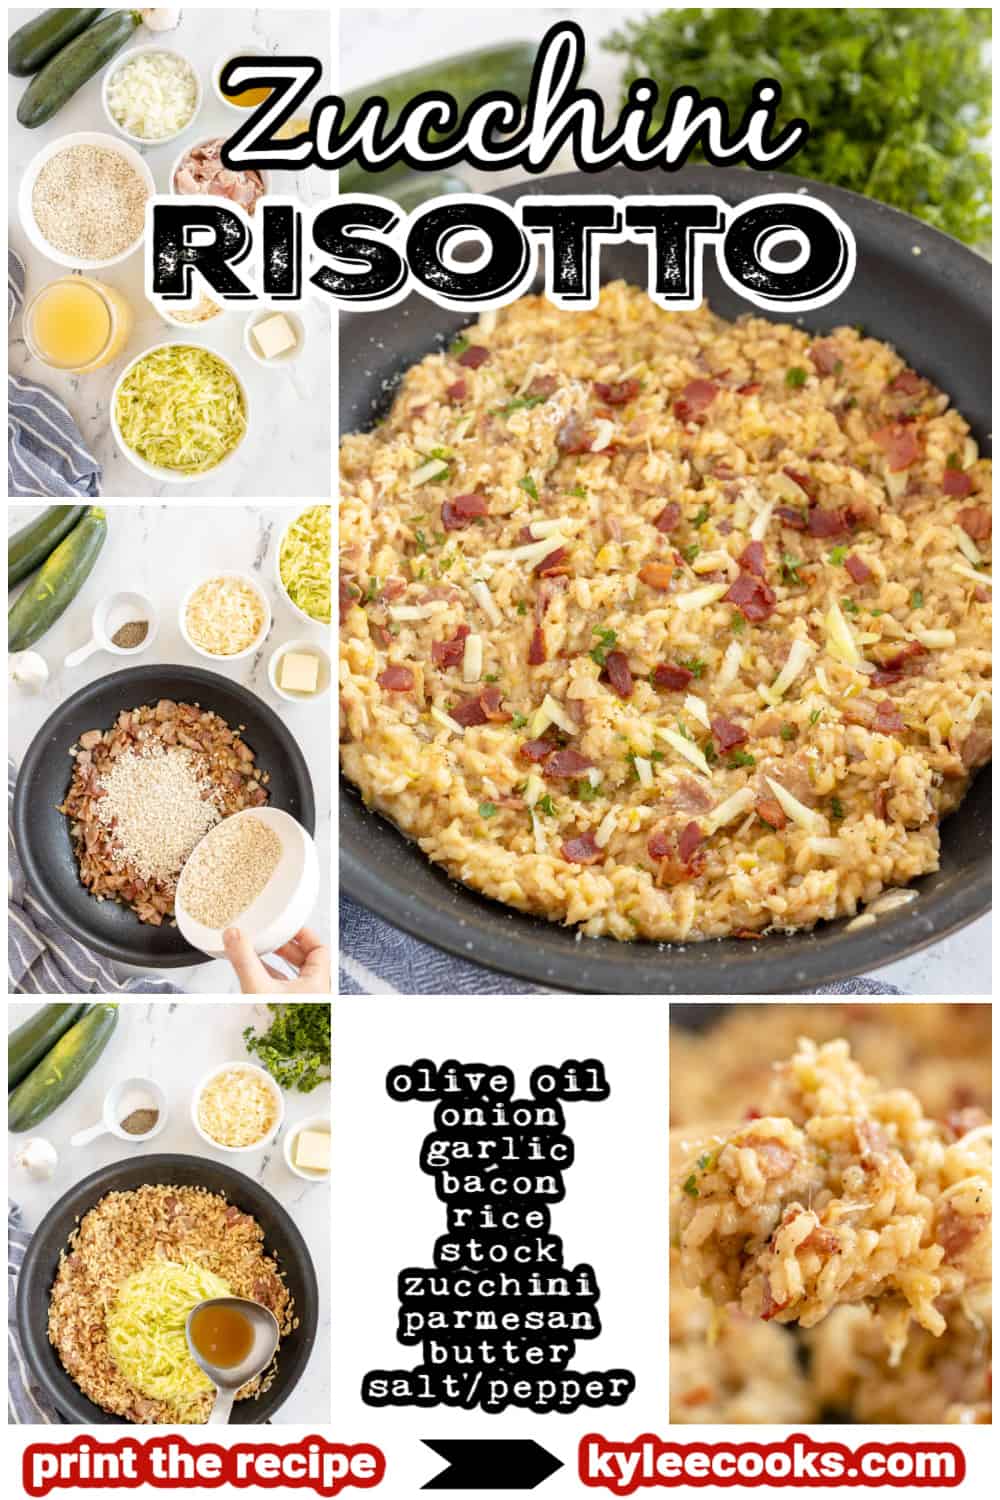 zucchini risotto with recipe name overlaid in text.